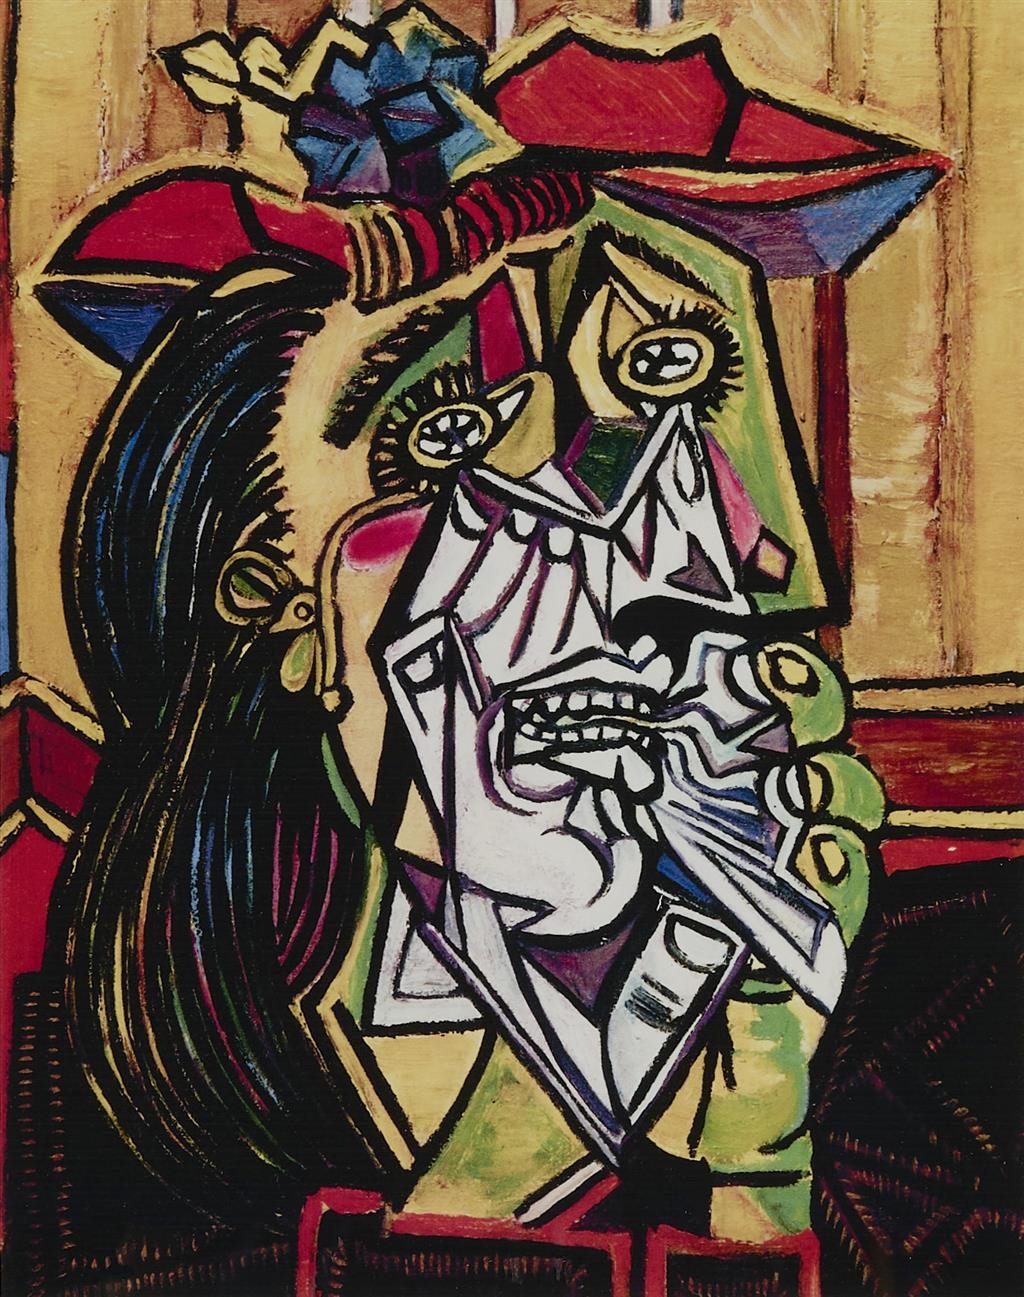 Artwork by Pablo Picasso, Weeping Woman with Red Hat, Made of giclee print